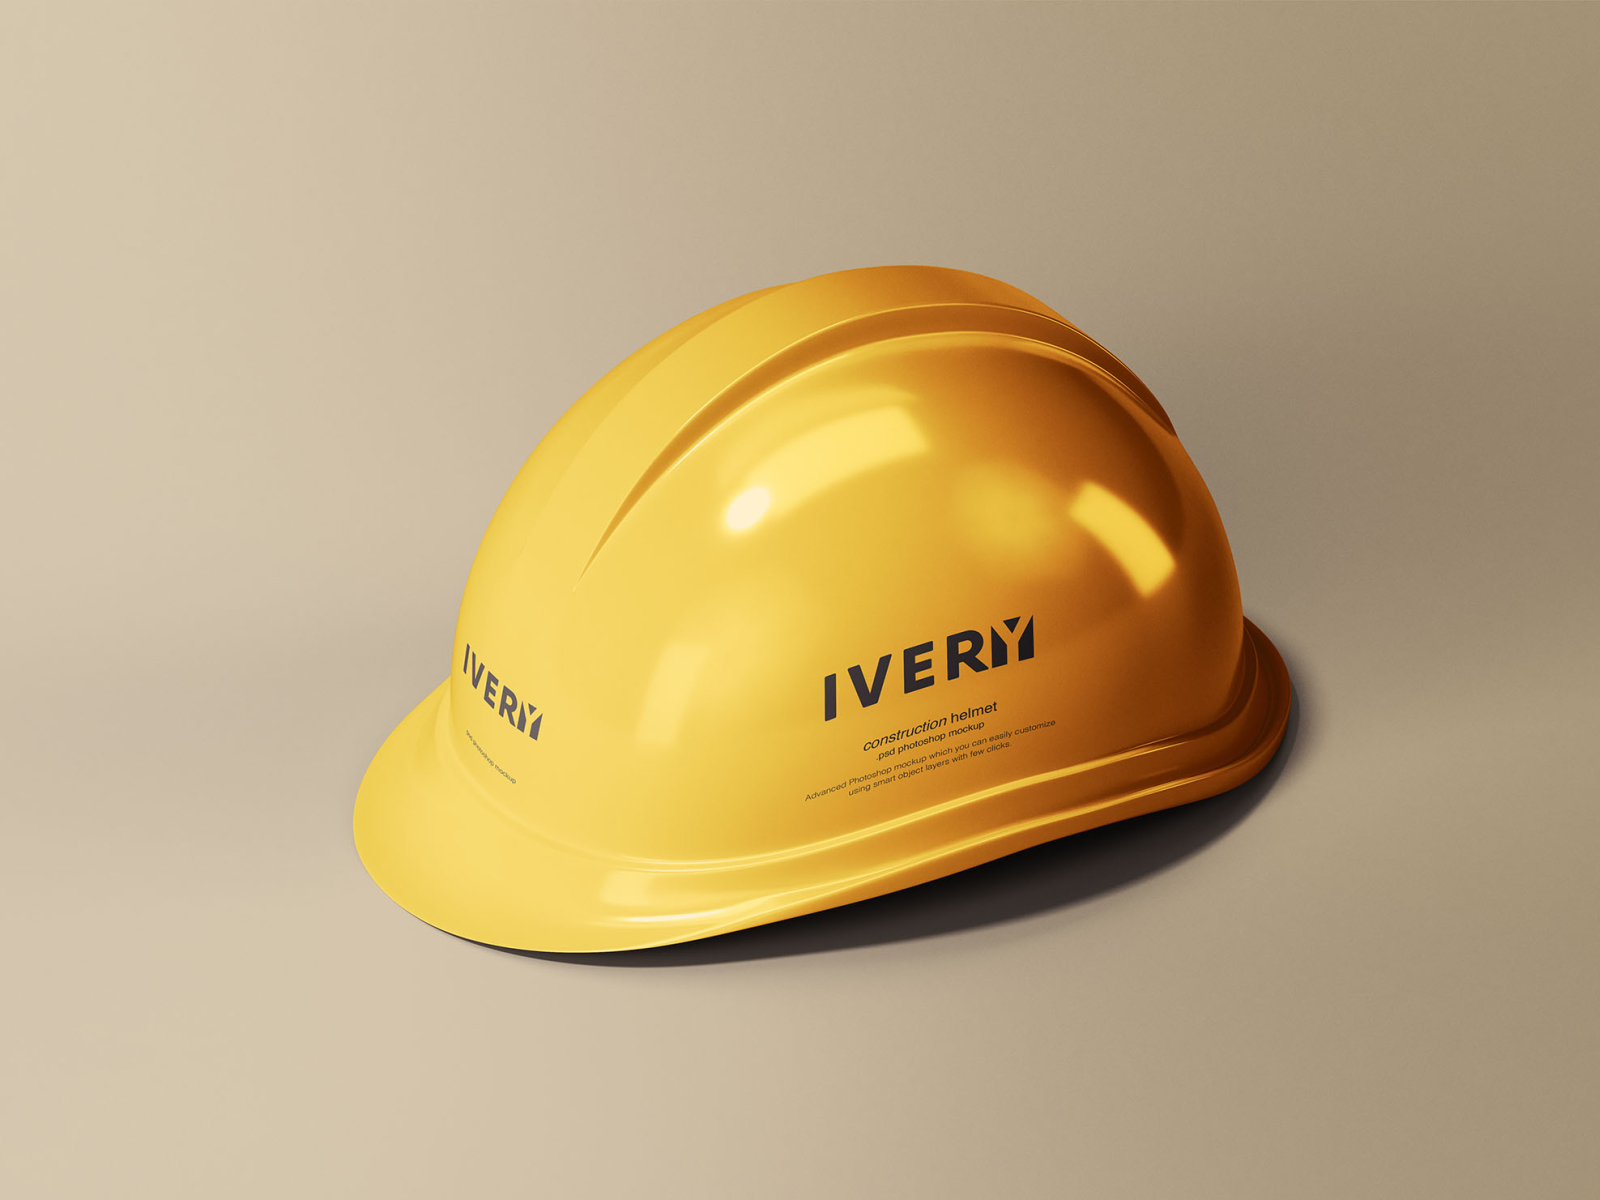 Download Construction Helmet Mockup by Graphic Pear on Dribbble